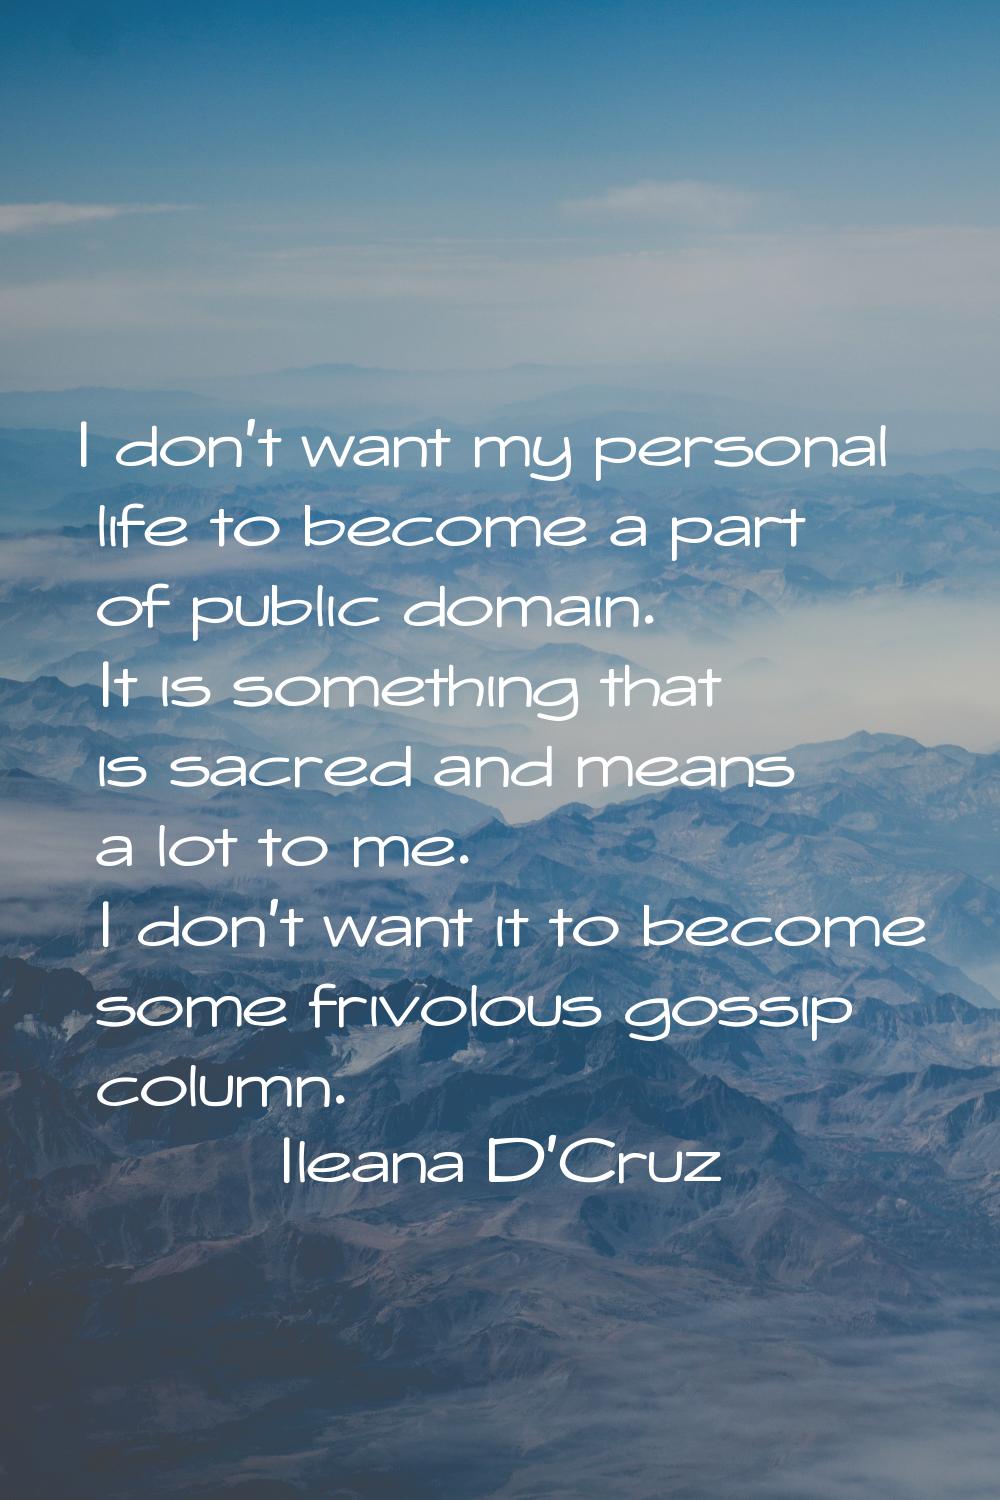 I don't want my personal life to become a part of public domain. It is something that is sacred and